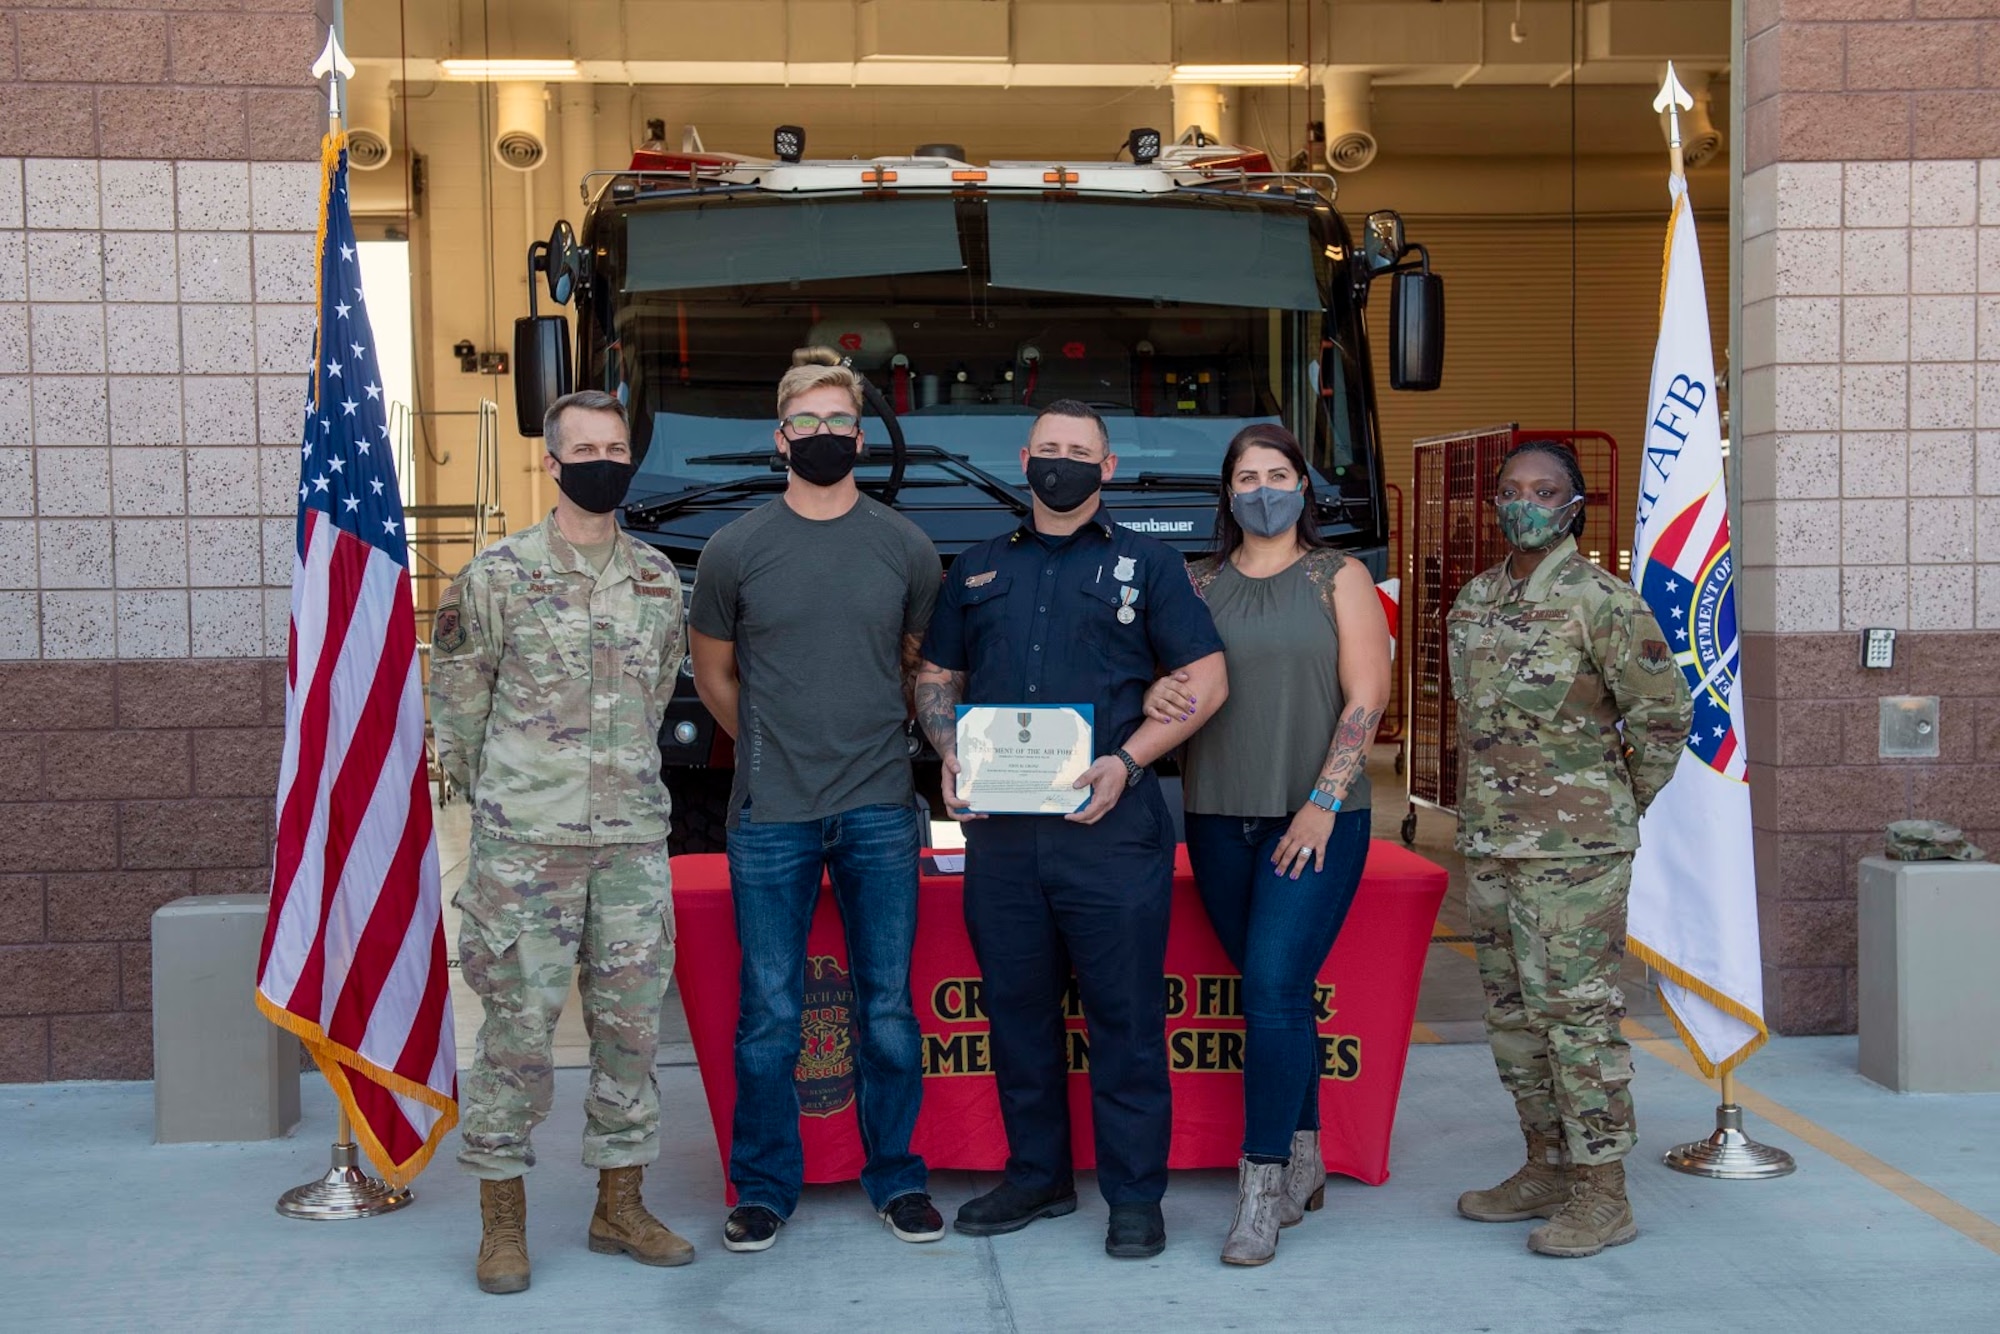 5 adults stand in front of a Fire Truck with the award recipient holding a certificate.